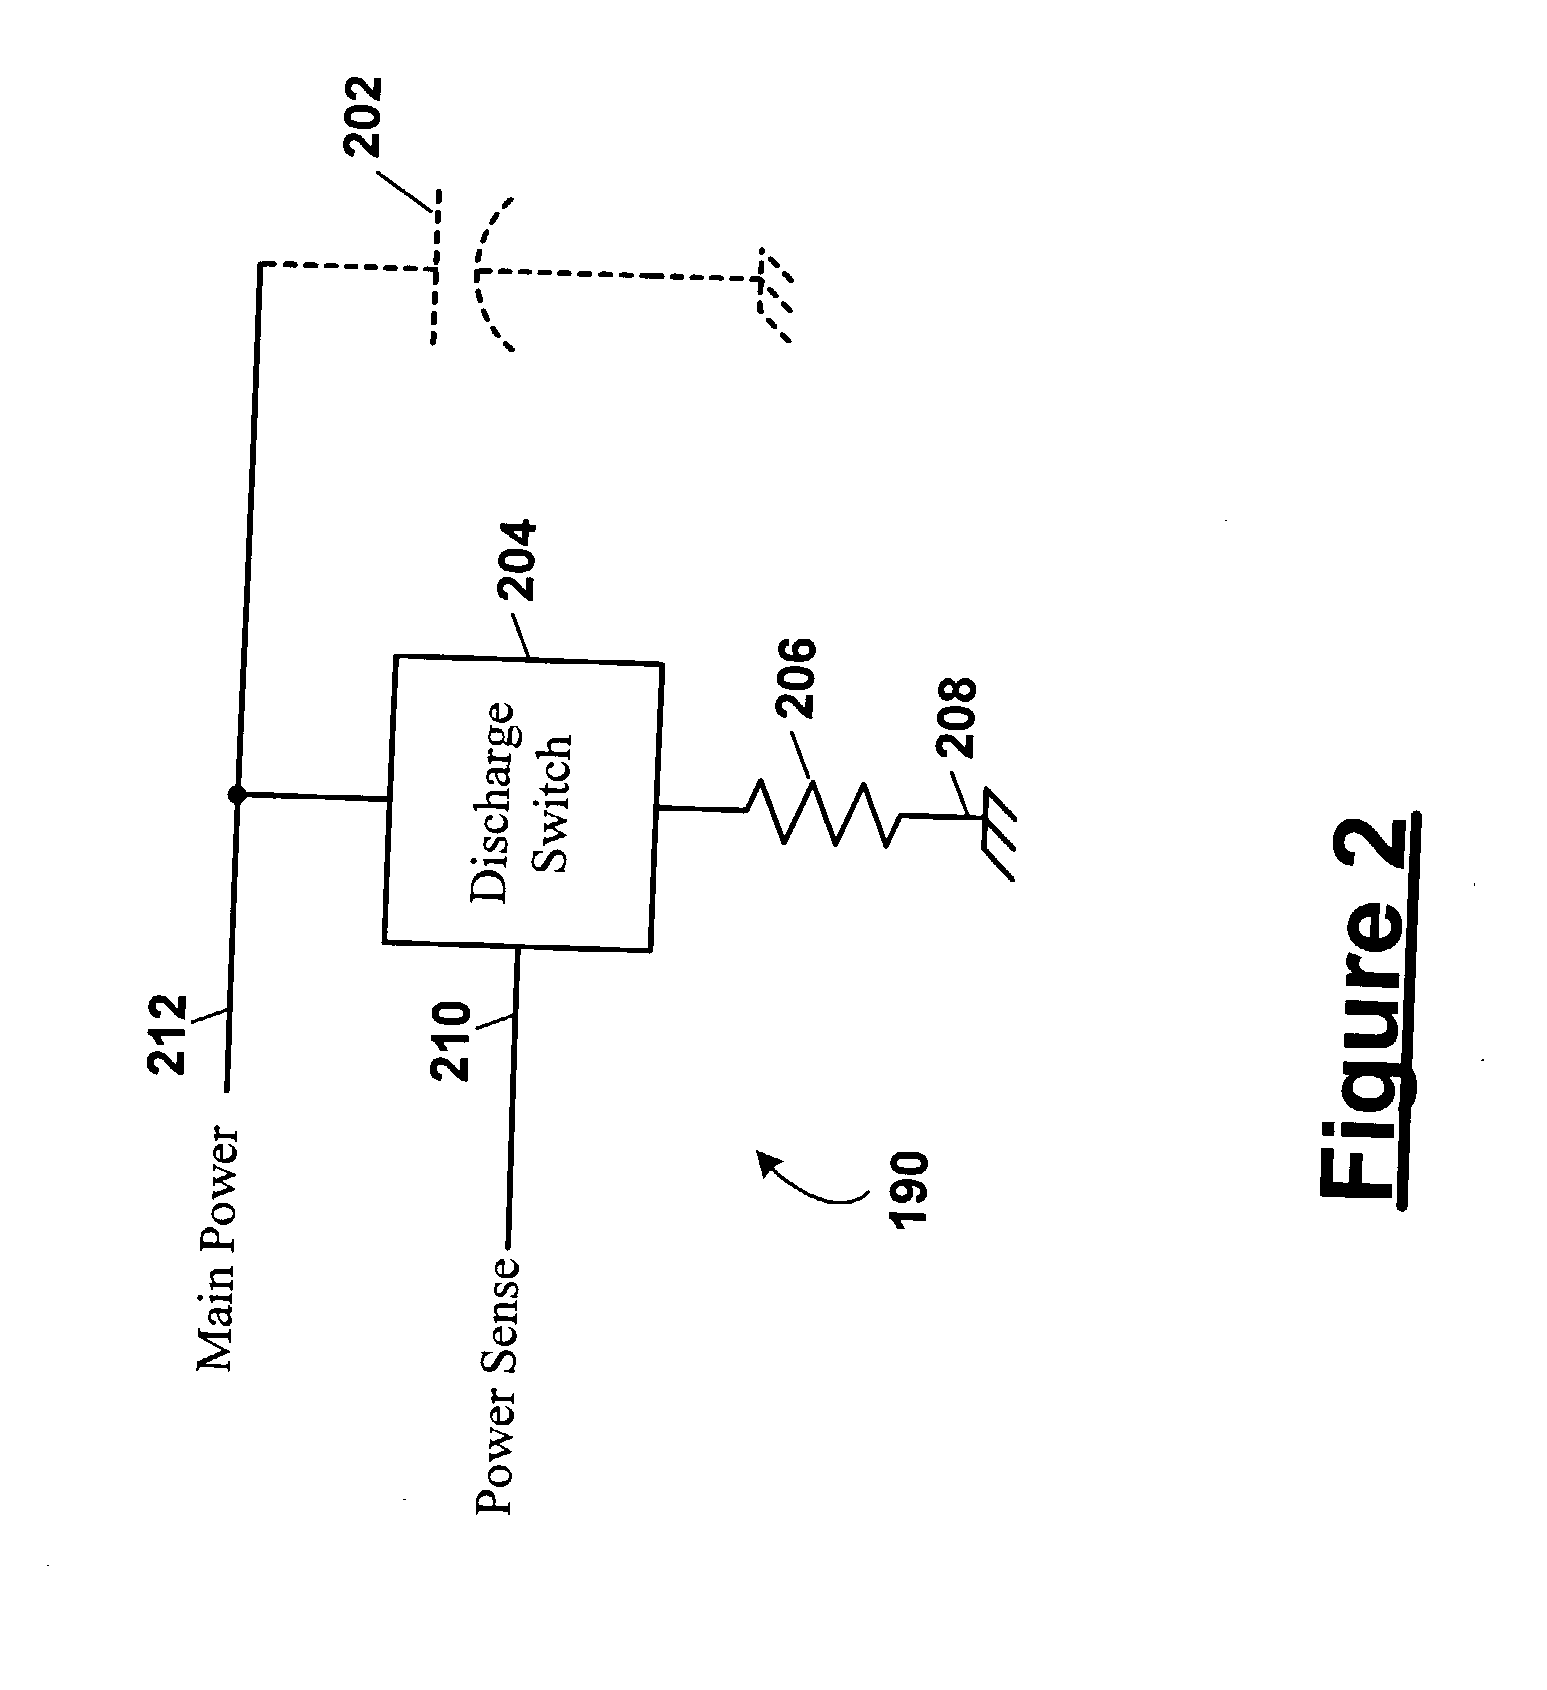 Draining residual power from a voltage plane